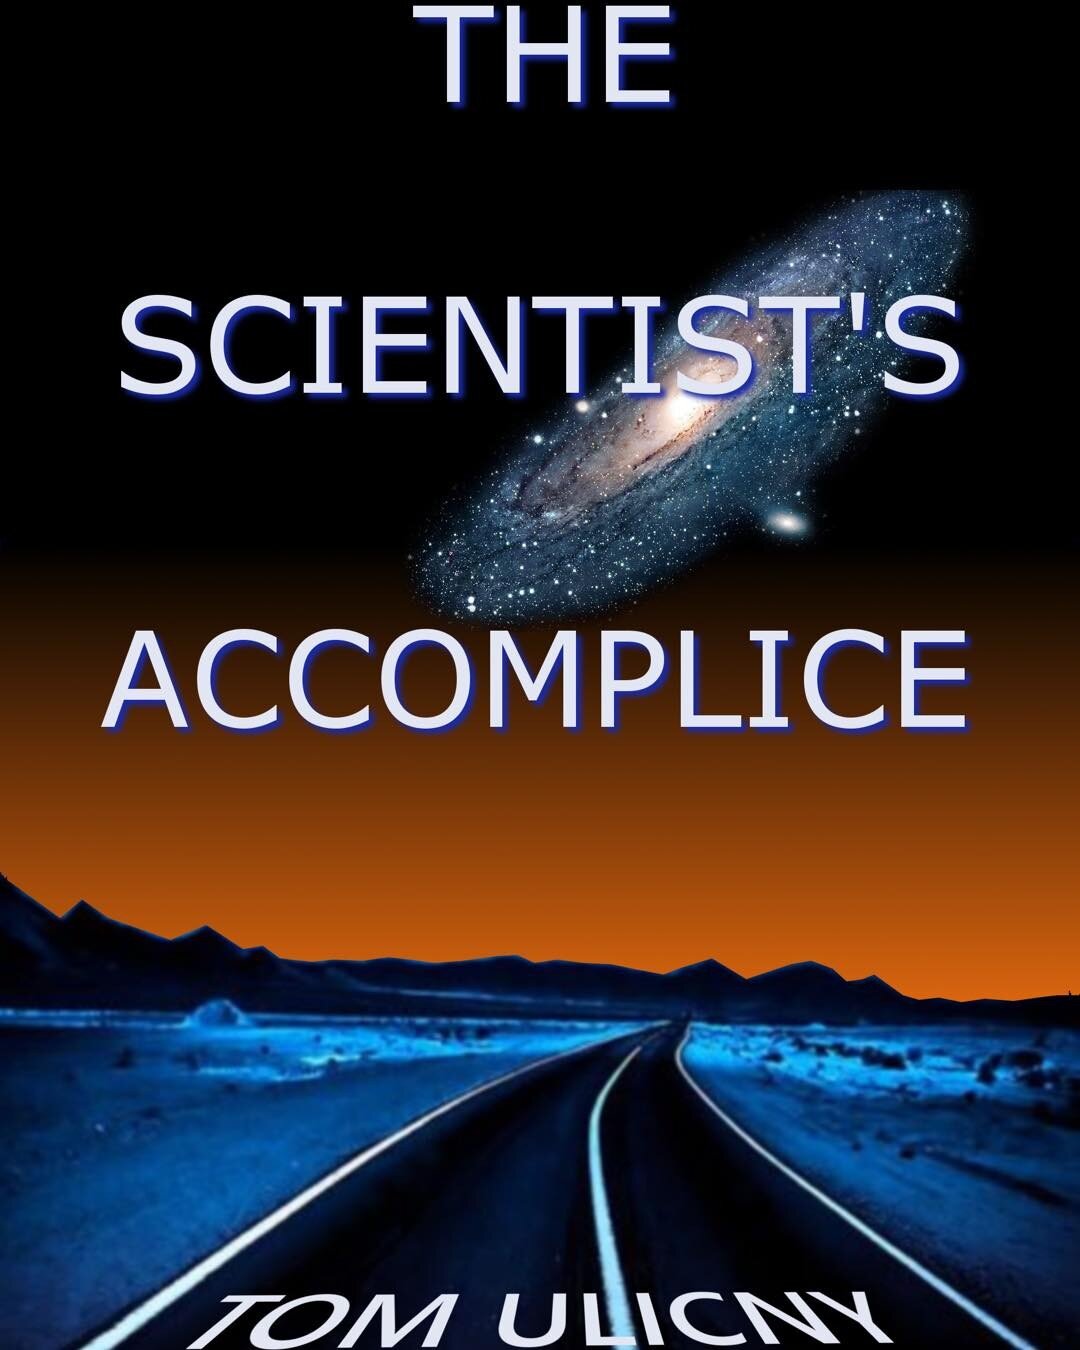 The Scientist's Accomplice now free as an ebook on Amazon.  https://tinyurl.com/ztgwbol  #bookgiveaways